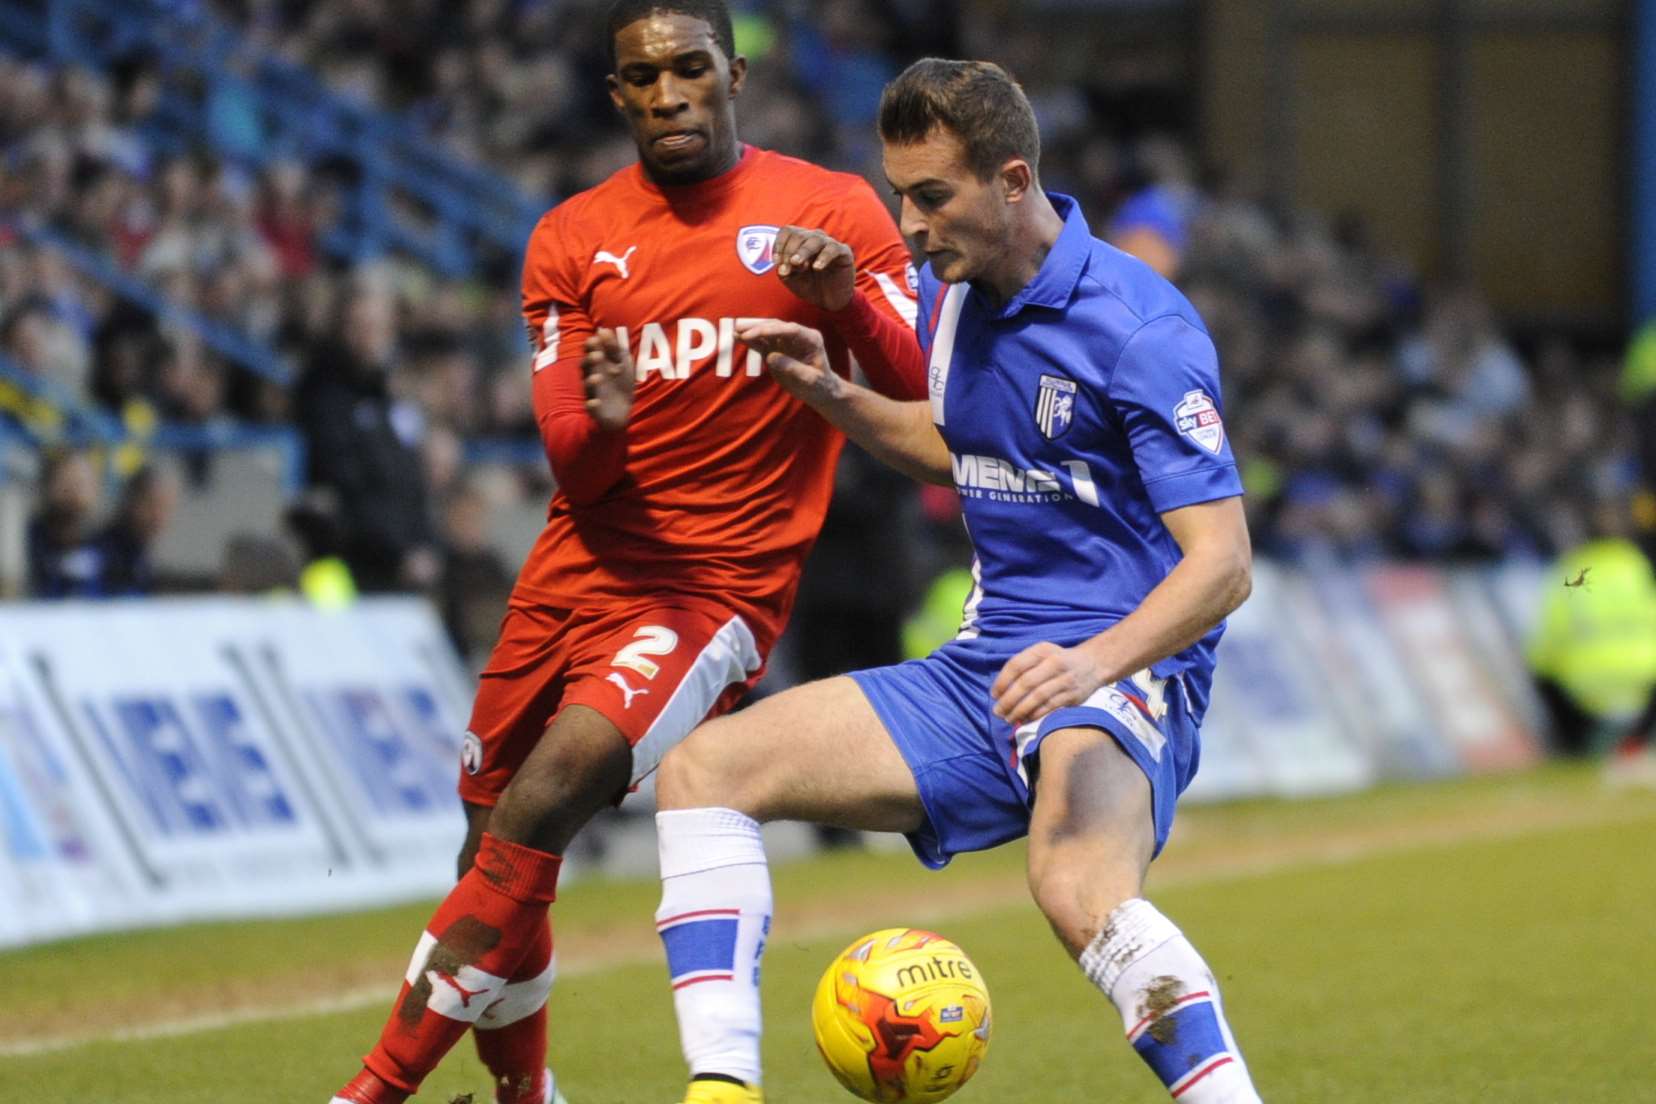 Former Brighton player Brennan Dickenson in action against Chesterfield Picture: Barry Goodwin